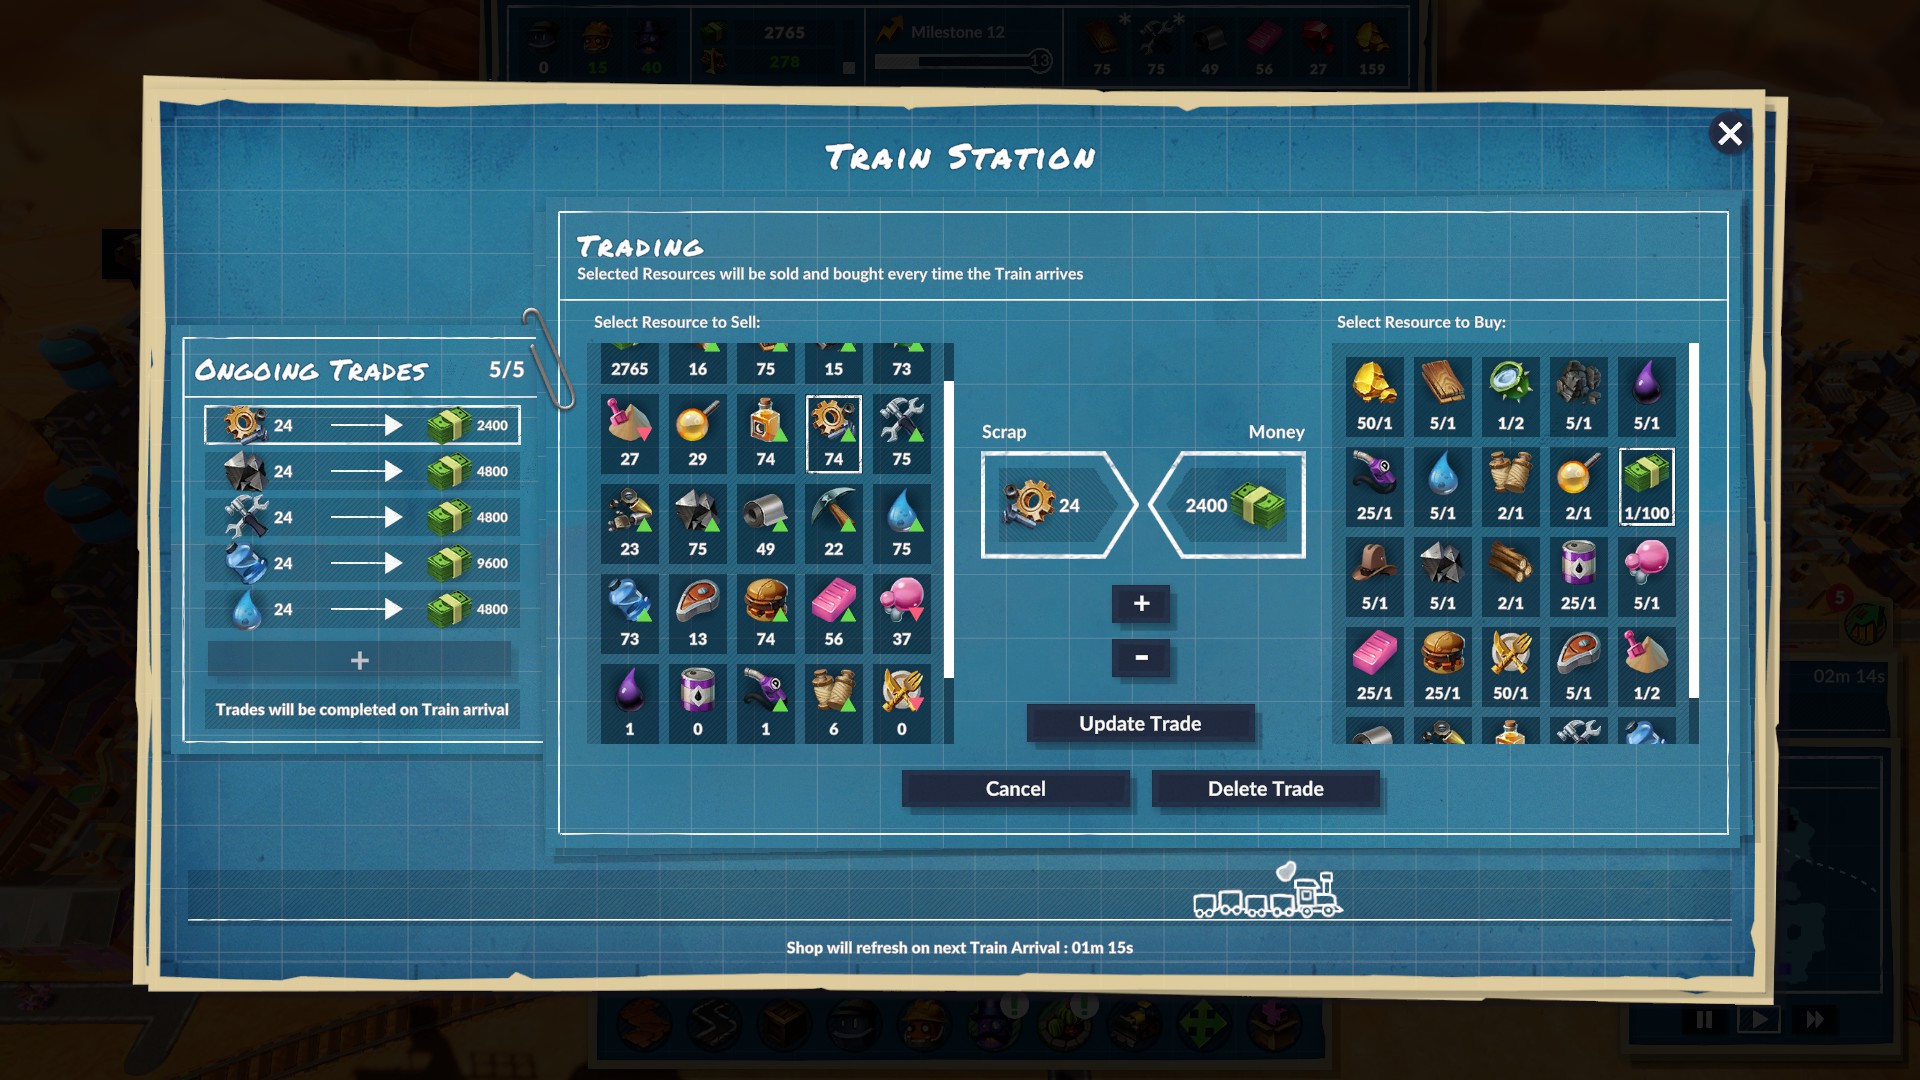 The trading screen in SteamWorld Build, with loads of resources available to buy and sell.